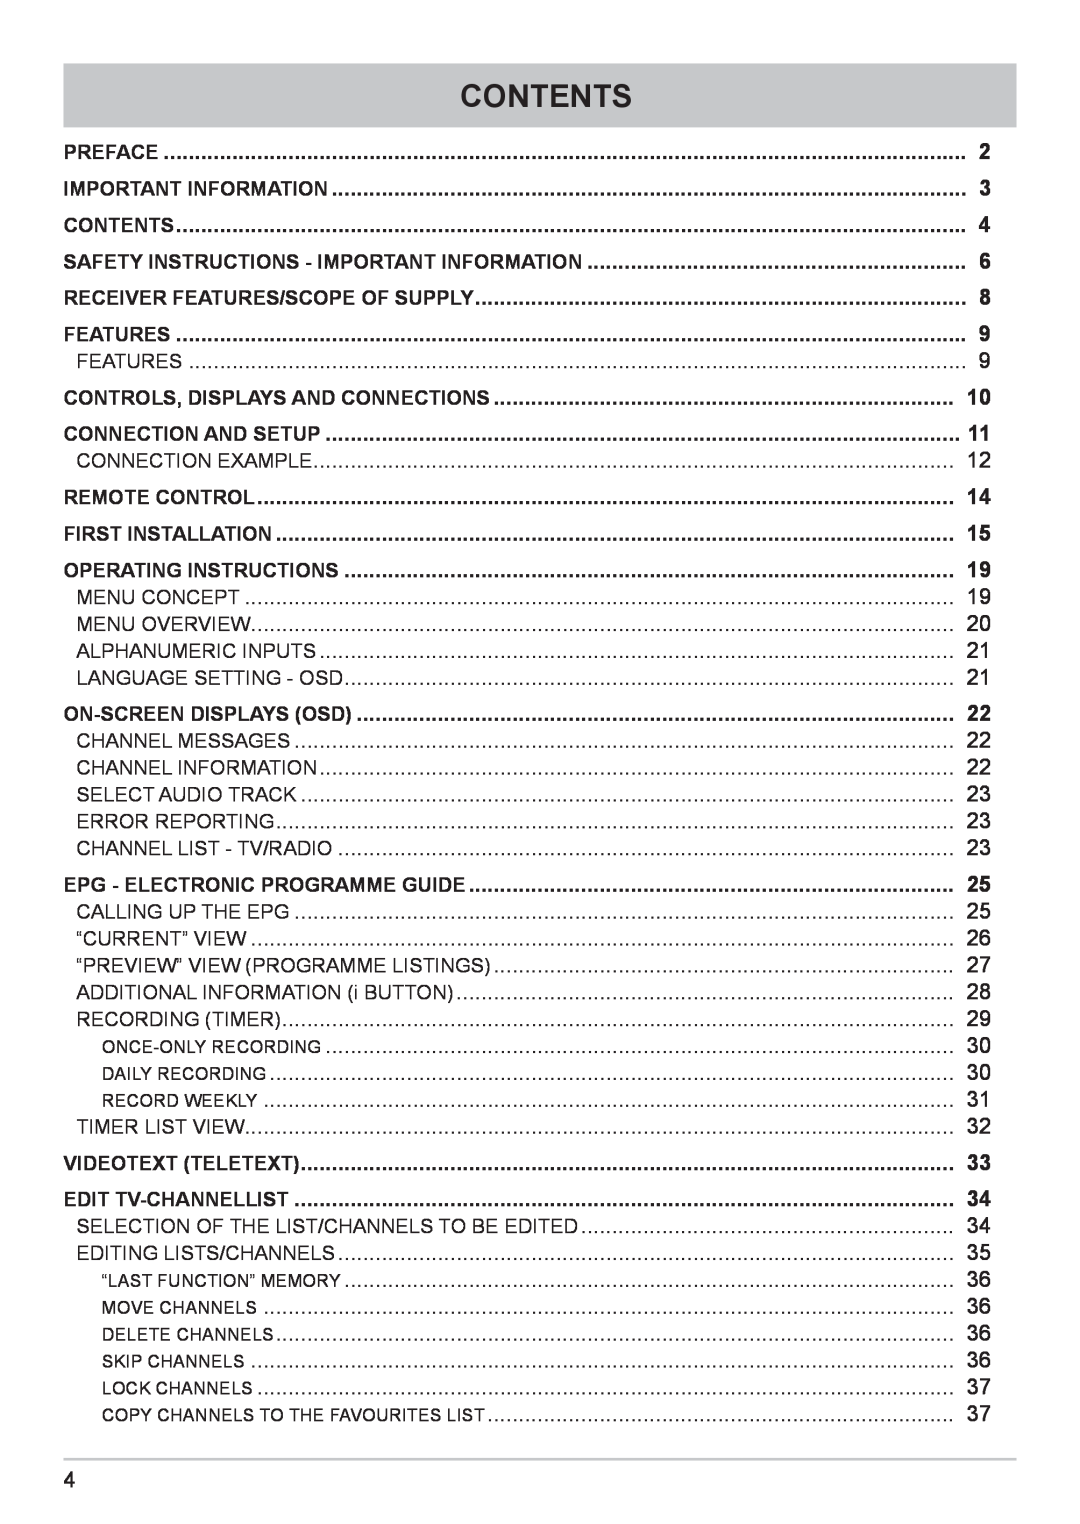 Kathrein UFC 662sw manual Contents, Once-Only Recording, Copy Channels To The Favourites List 